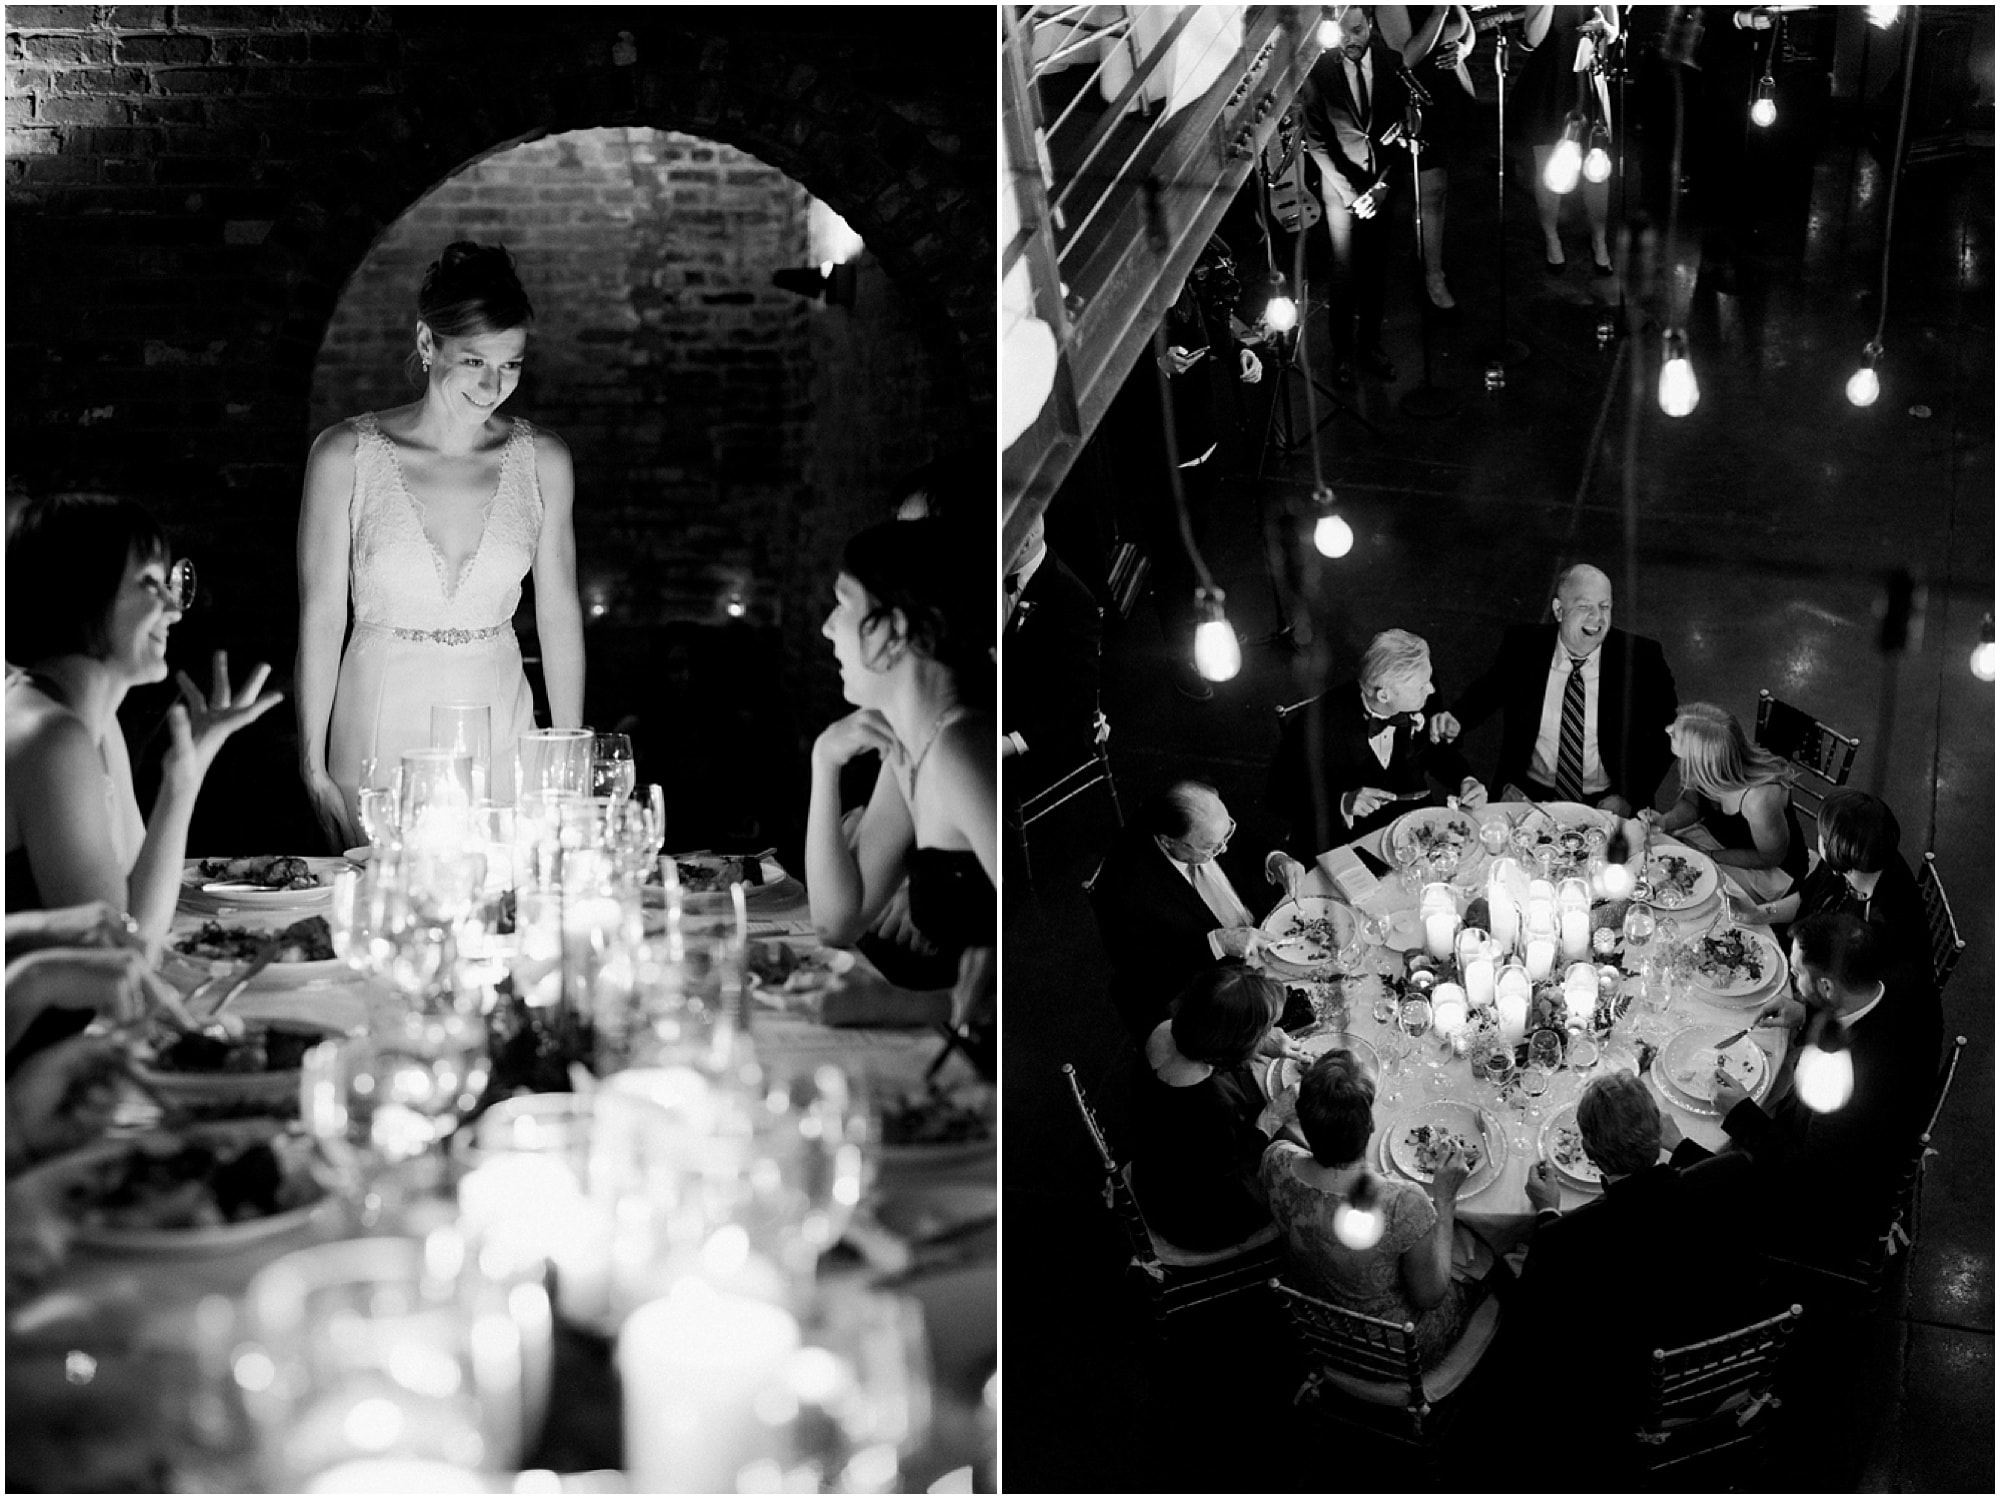 The Foundry, Winter NYC wedding, José Rolon Events, Eileen Meny Photography